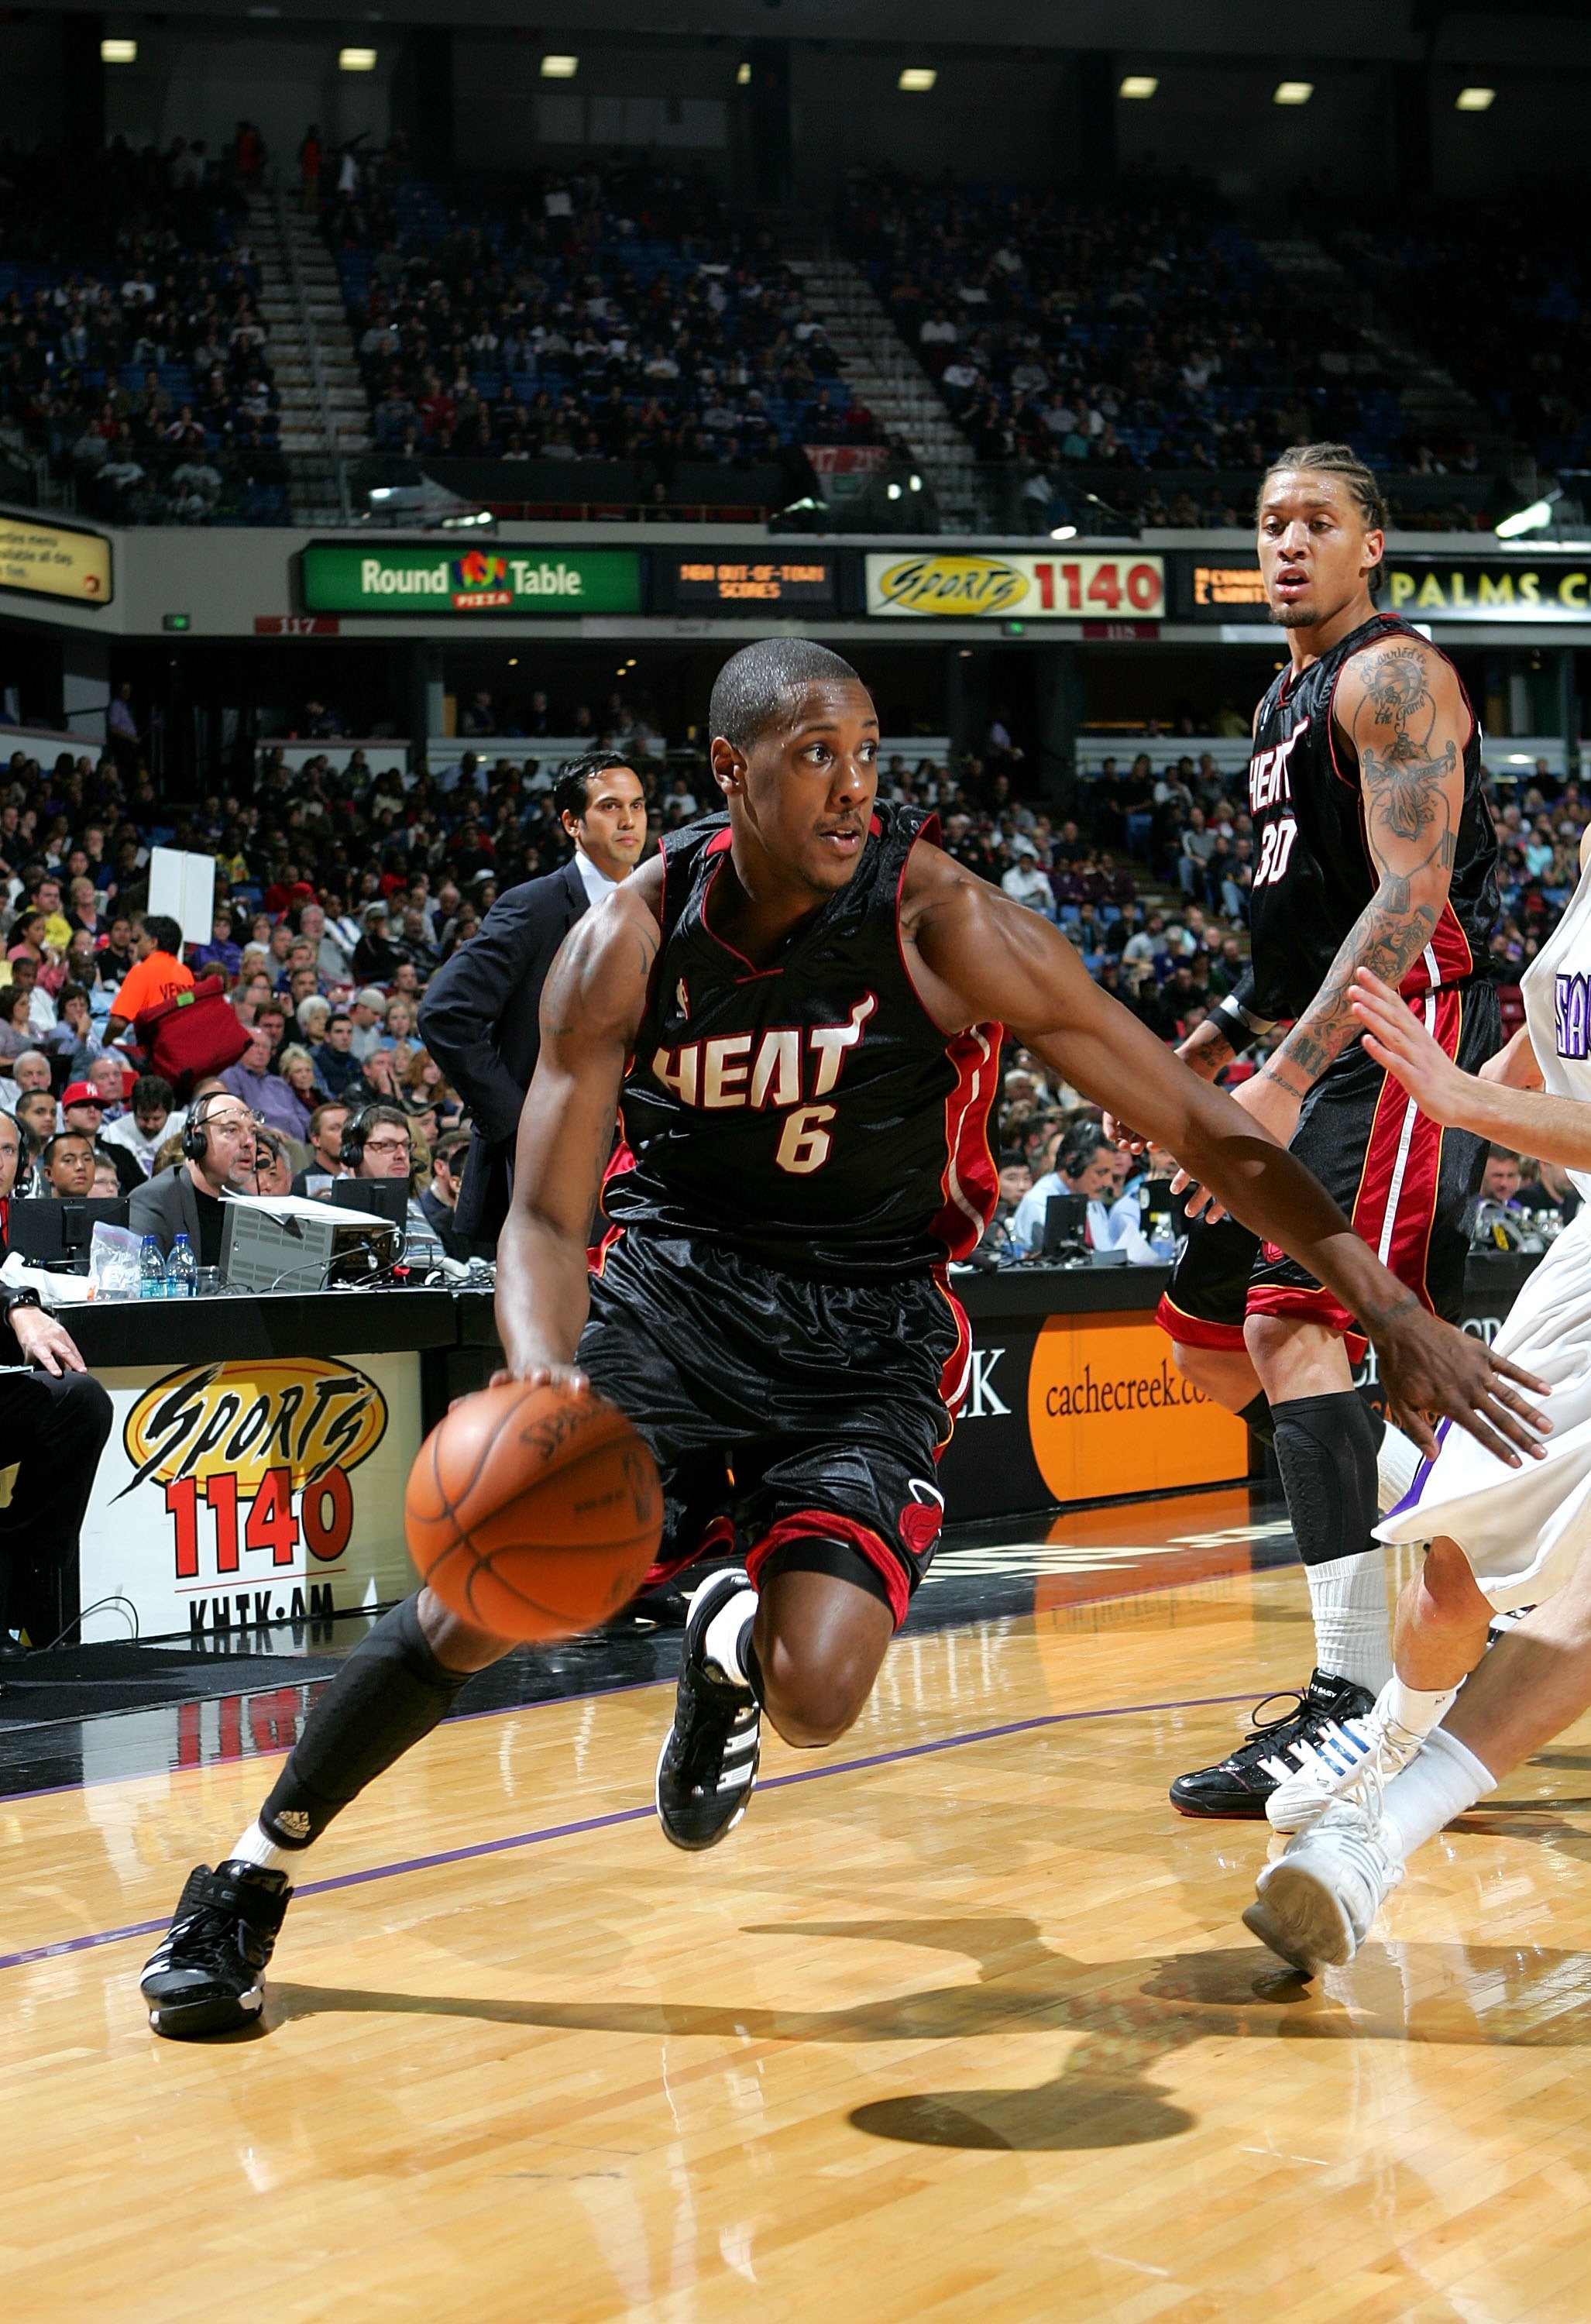 LeBron James Miami Heat: Why the King Can Average a Triple-Double